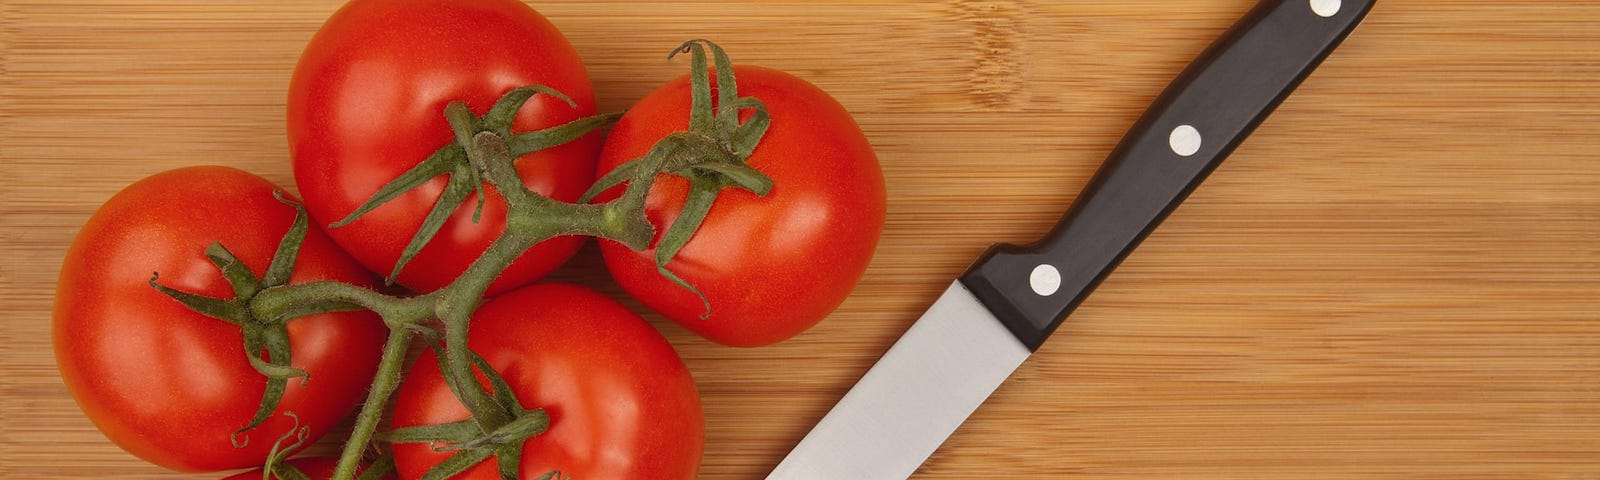 Five ripe tomatoes still connected on the vine sitting on a wooden cutting board next to a kitchen knife with a black handle